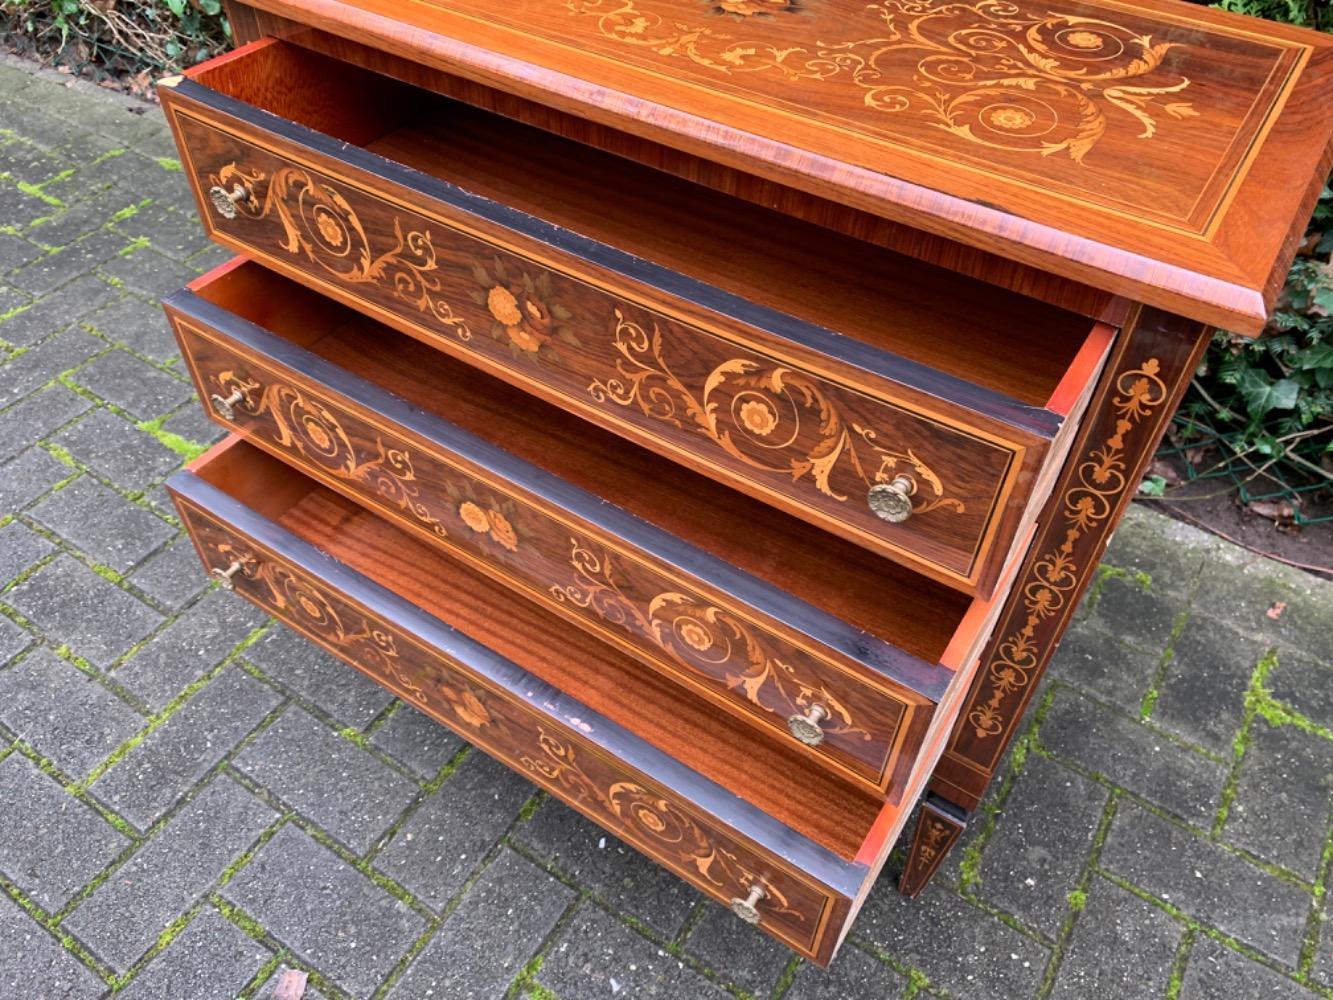 Inlaid Chest of drawers